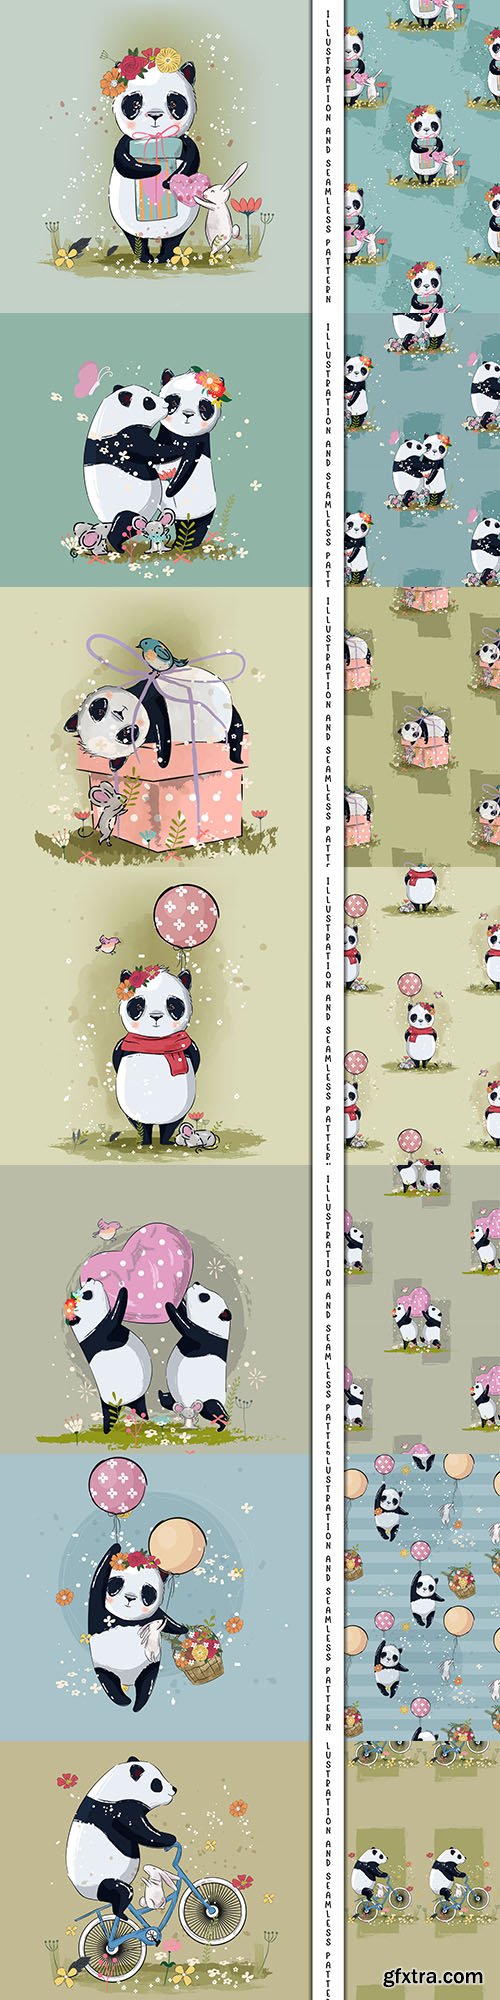 Cute little panda with flowers and decorative pattern